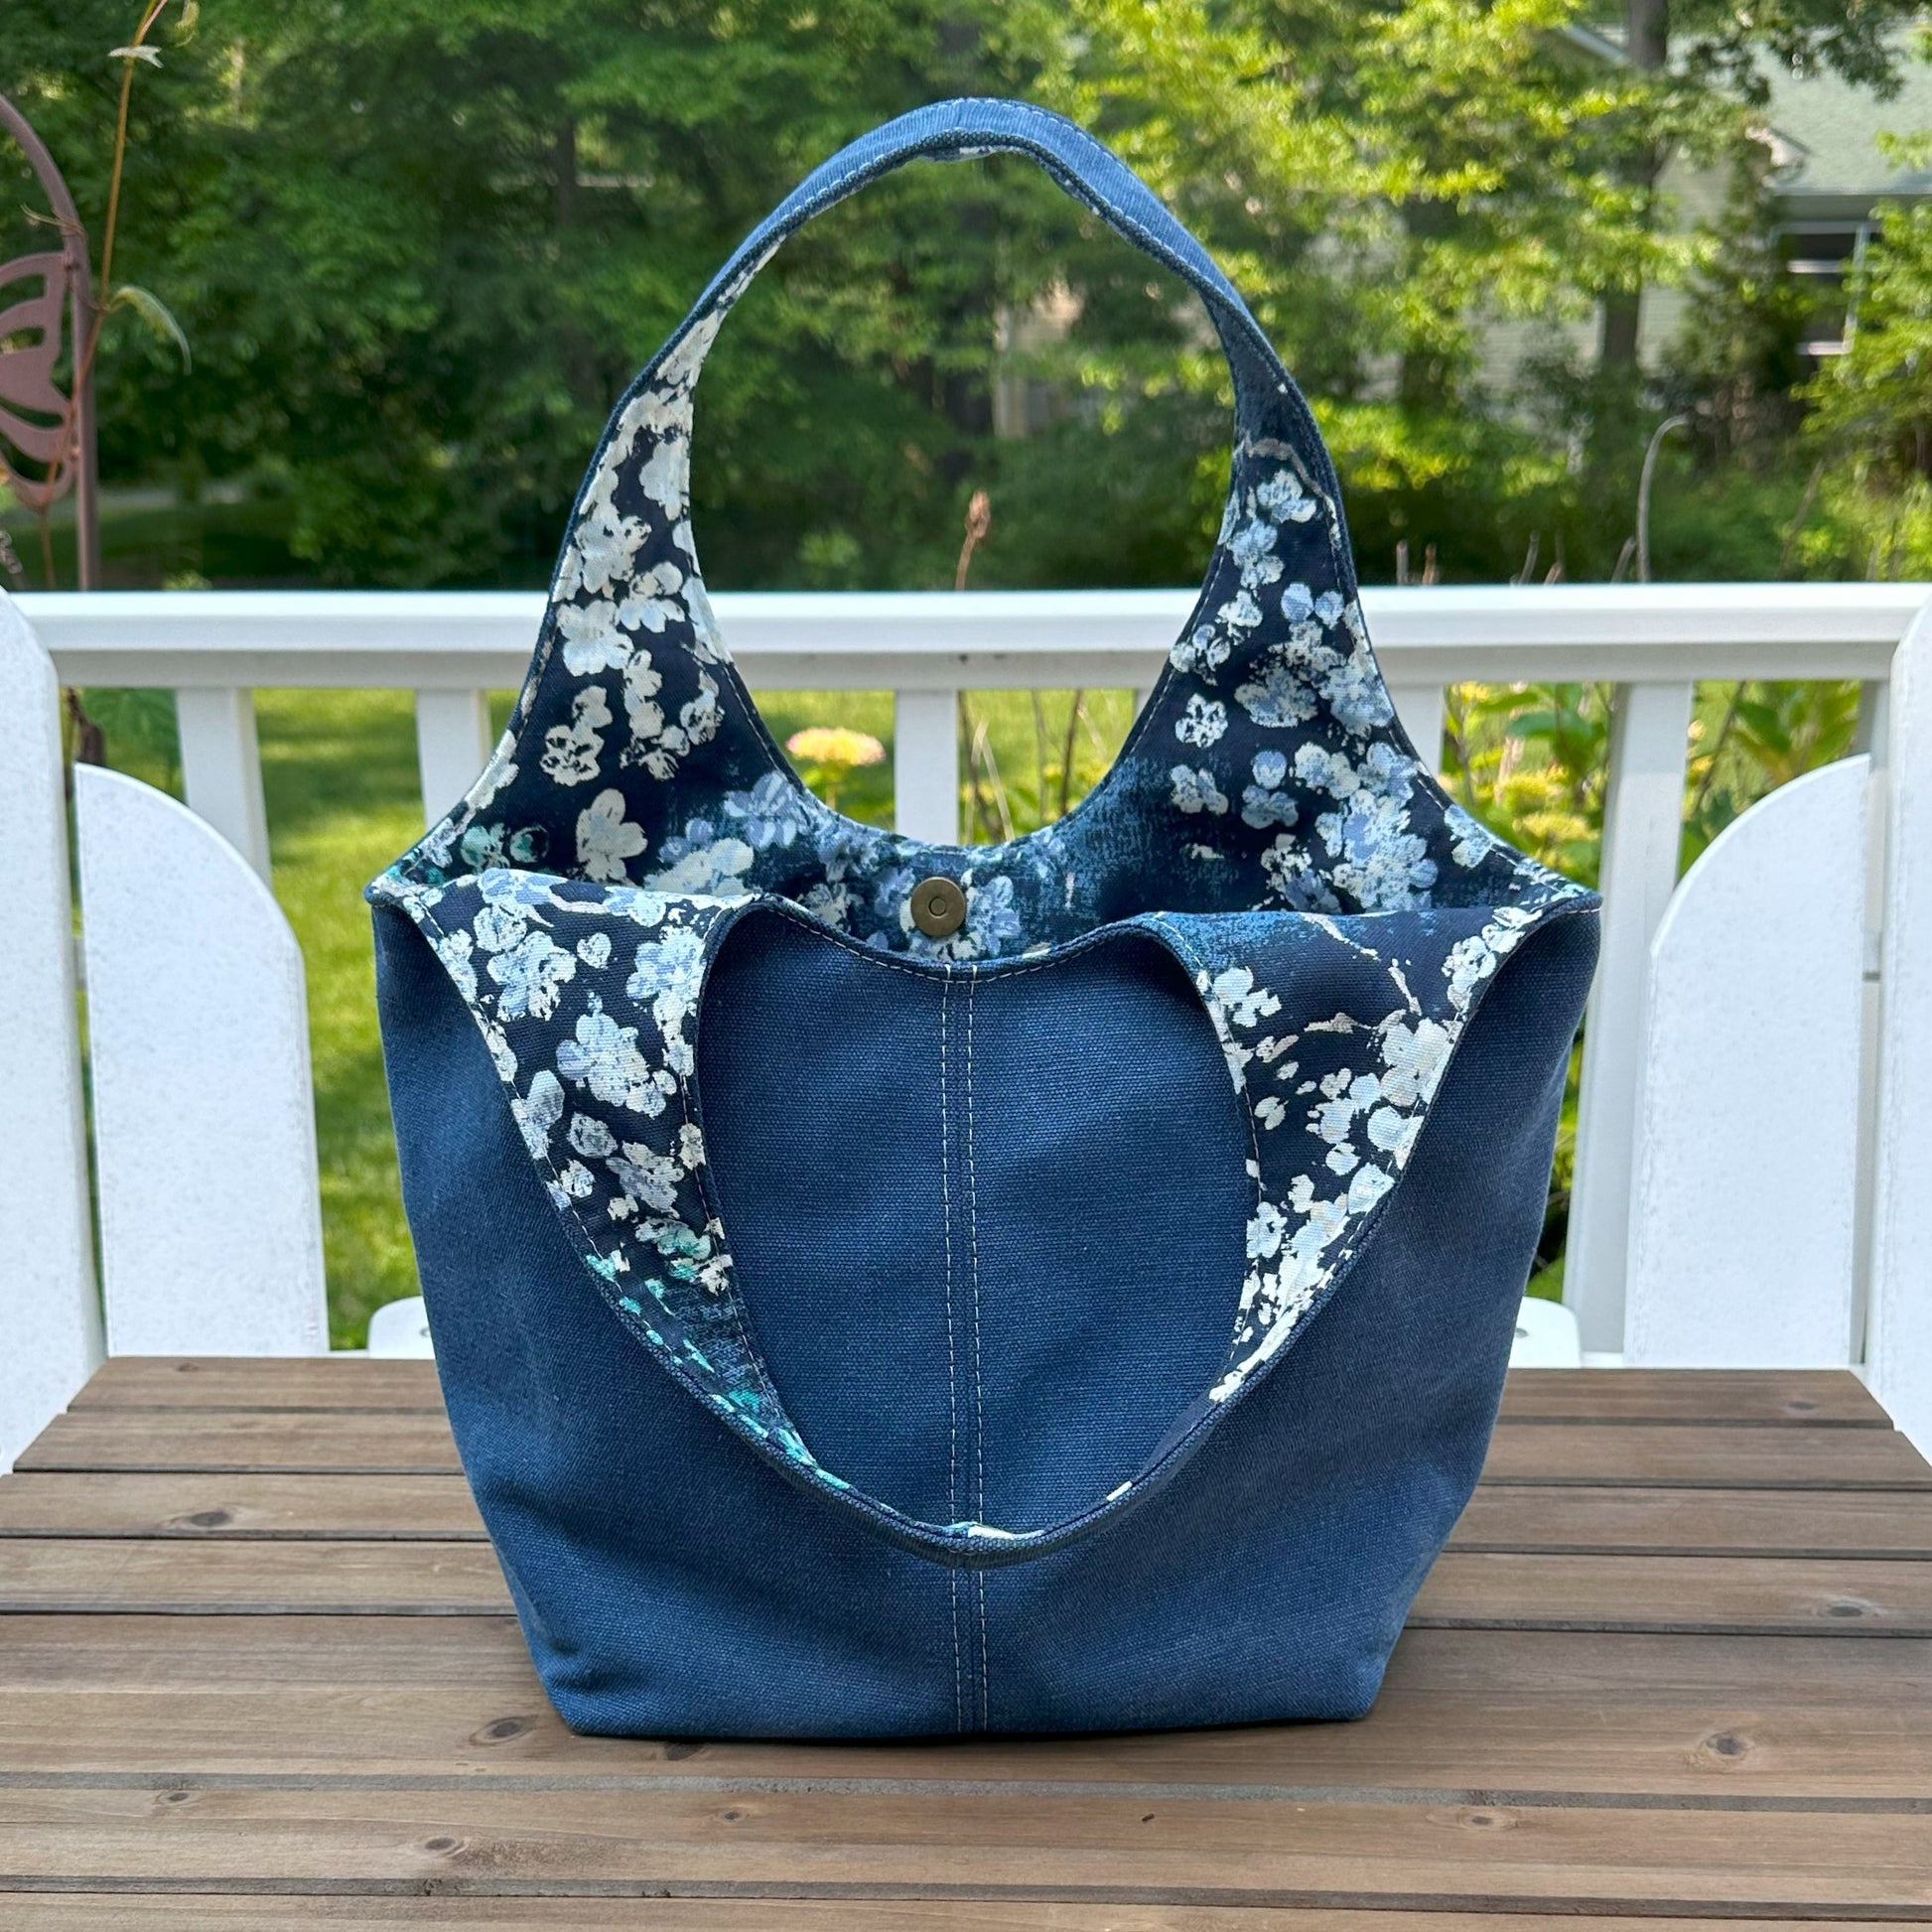 Denim Blue Stone Washed Canvas and Dewdrop Canvas interior with Antique Brass Rivets Cambridge Shoulder Bag squirescanvascreations.com 